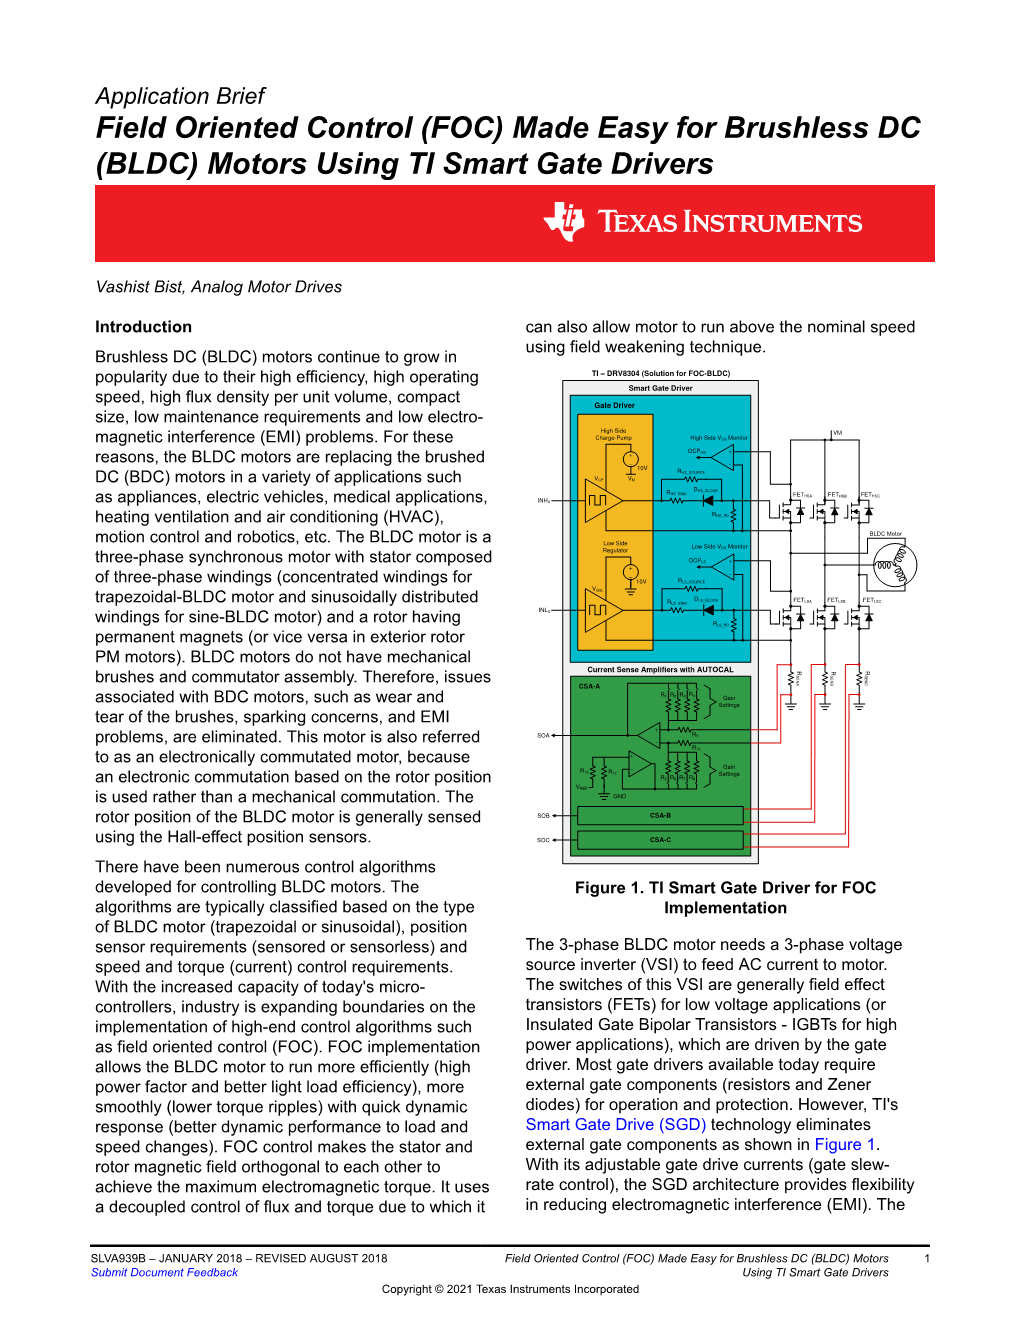 Field Oriented Control Made Easy for Brushless DC Motors Using Smart